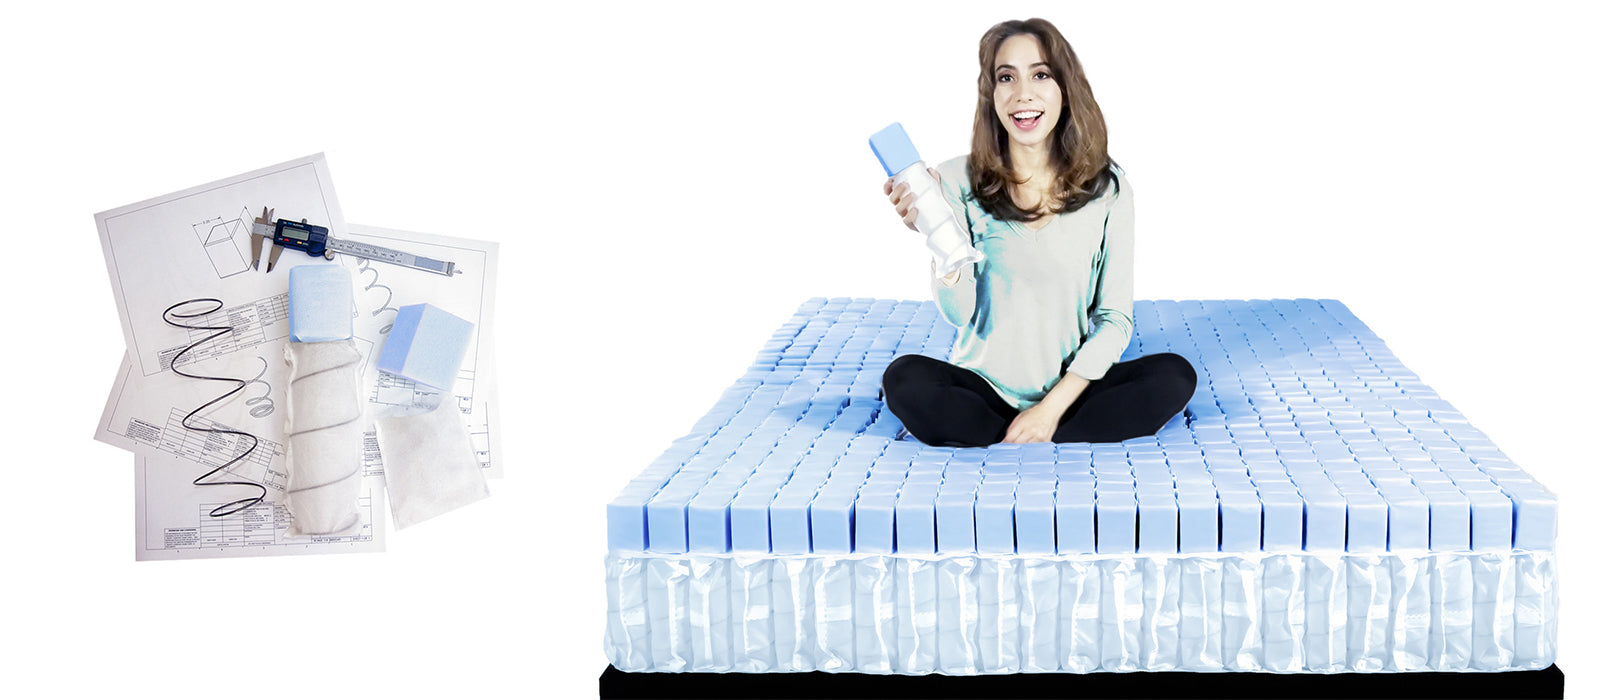 SleepOvation Confirms Patent Grant For Most Significant Mattress Invention in Last 100 Years